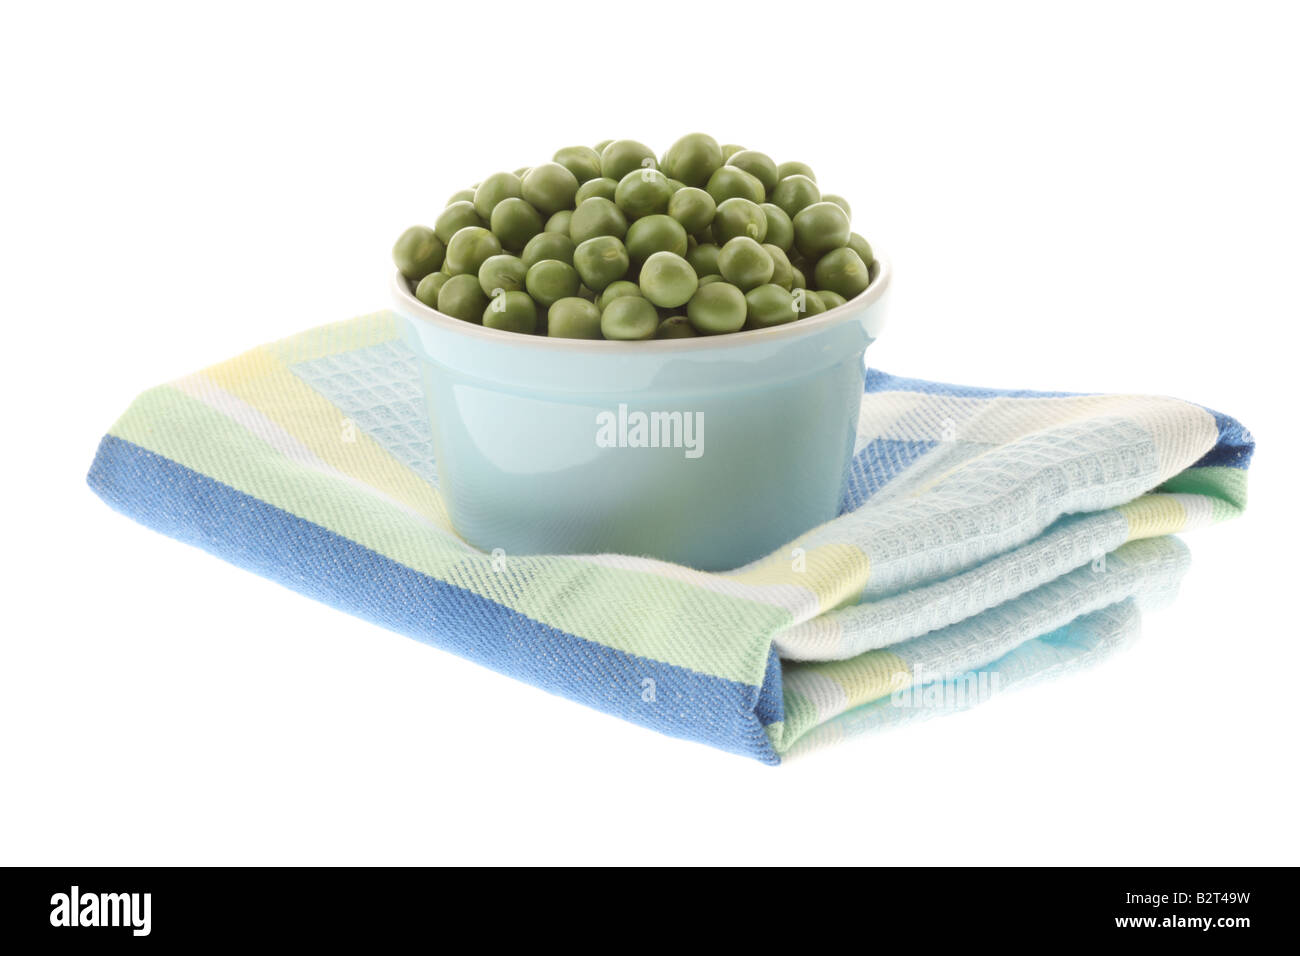 Fresh Healthy Raw Uncooked Green Garden Peas, With No People Isolated On White Stock Photo